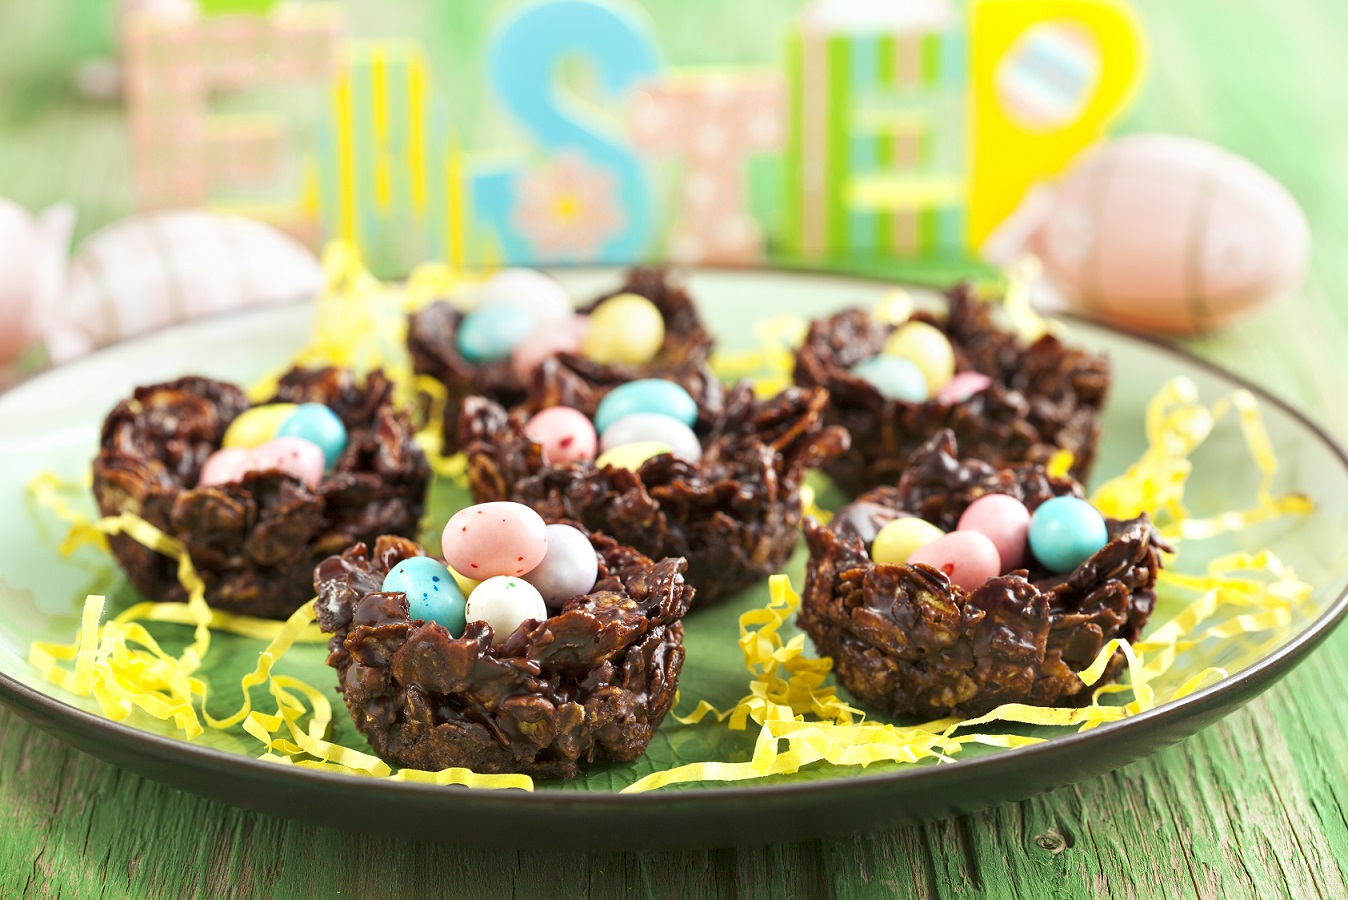 Top 3 Easter Baking Recipes You Have to Try